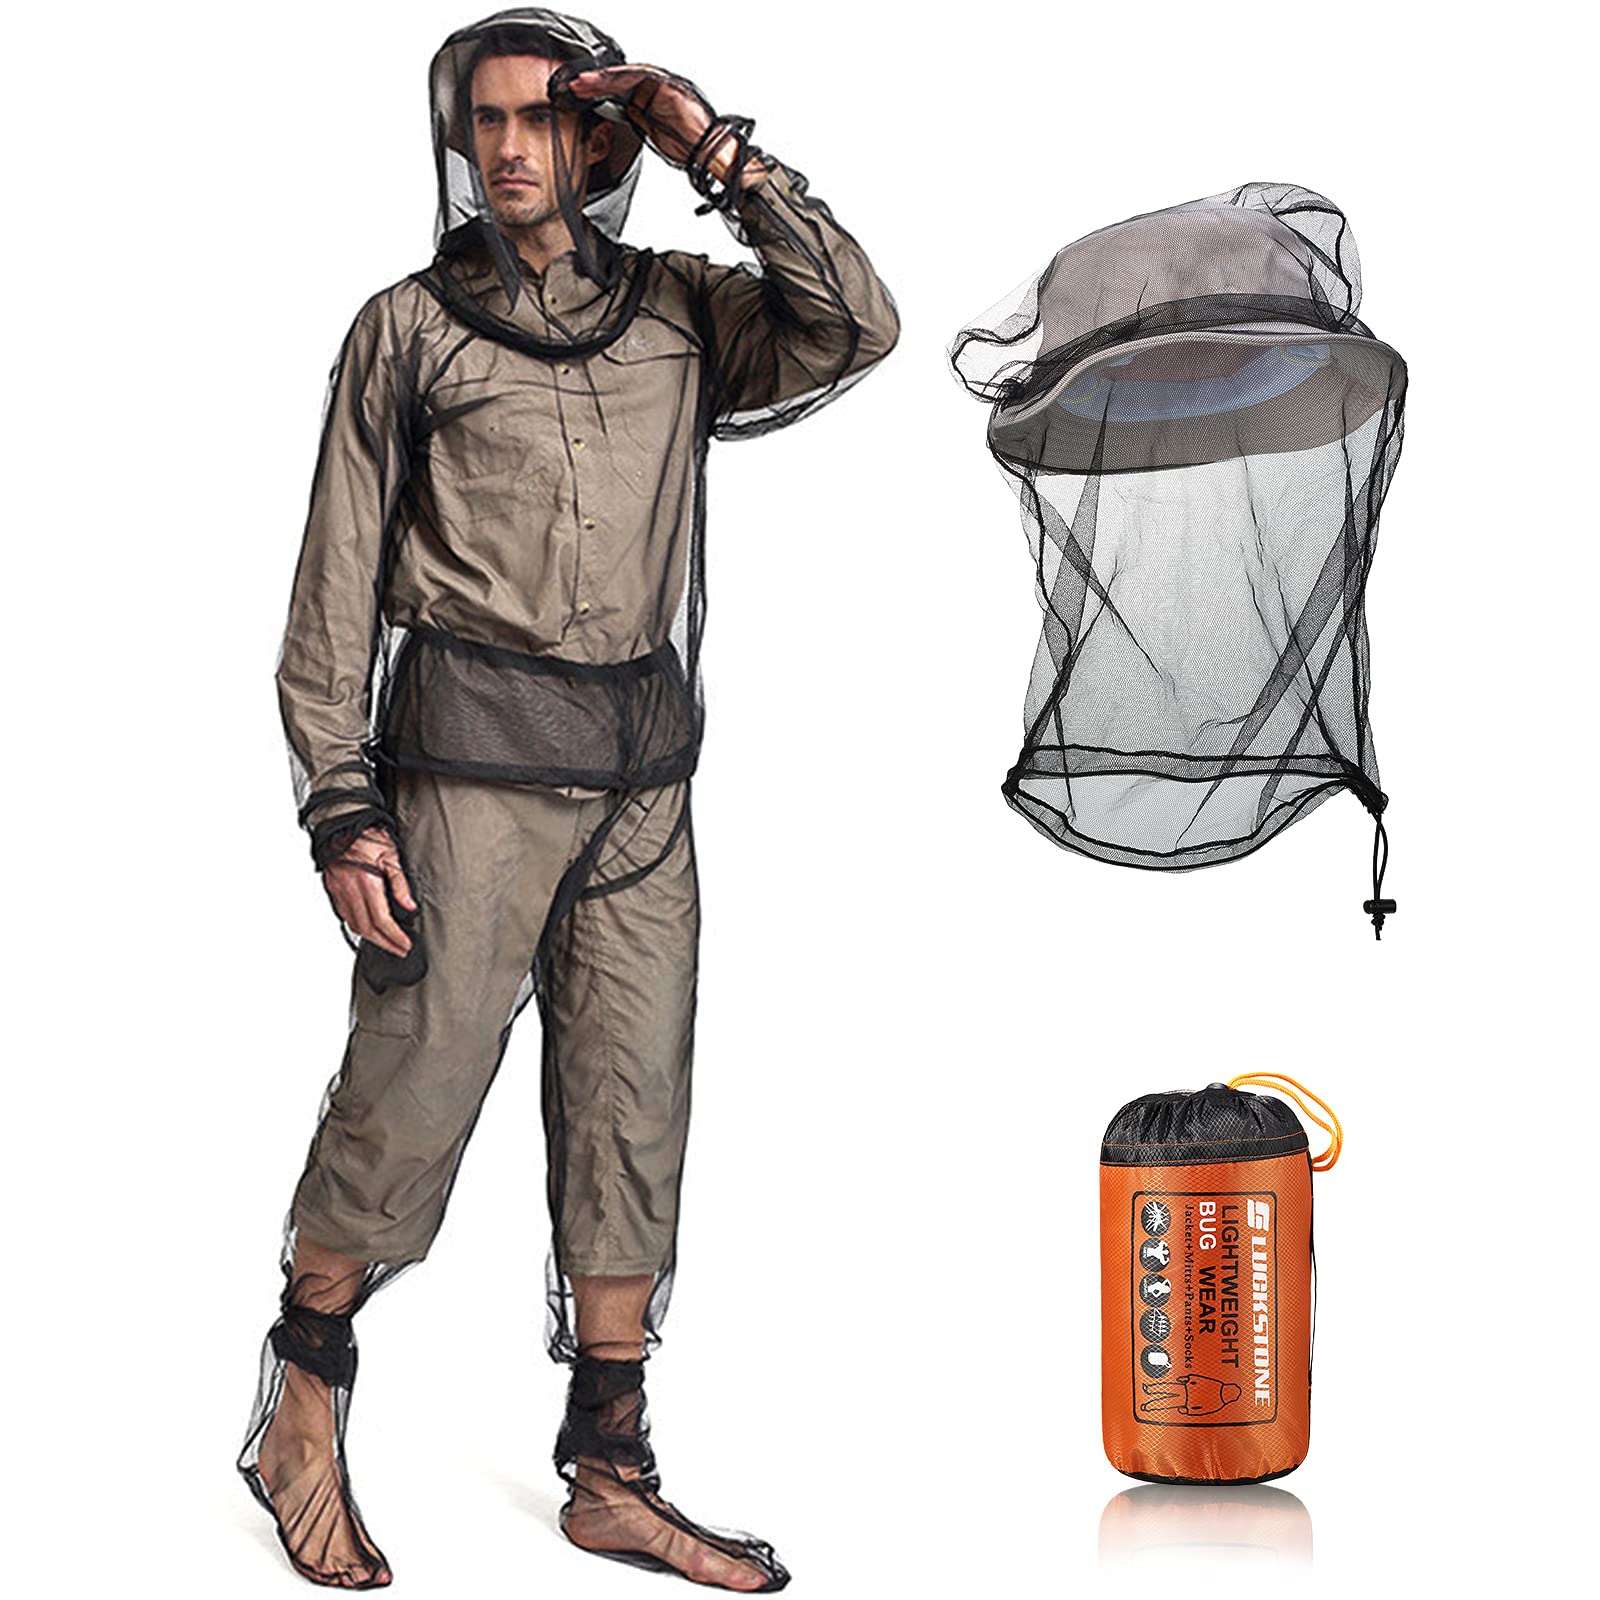 Mosquito Net Suit Include Bug Jacket Hood, Face Covering, Pants